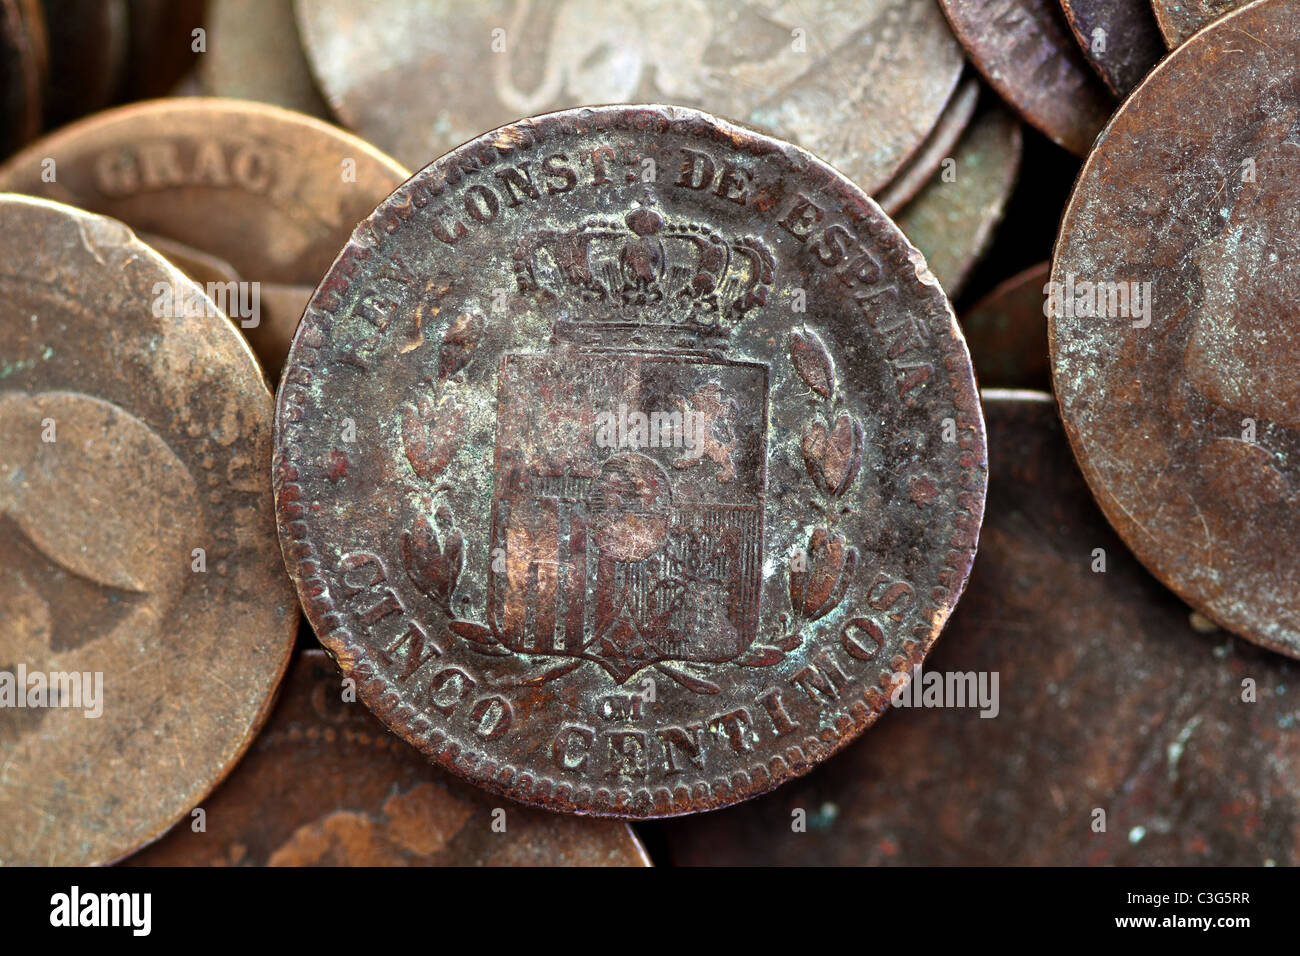 coin peseta real old spain republic 1937 currency and cents centimos Stock Photo